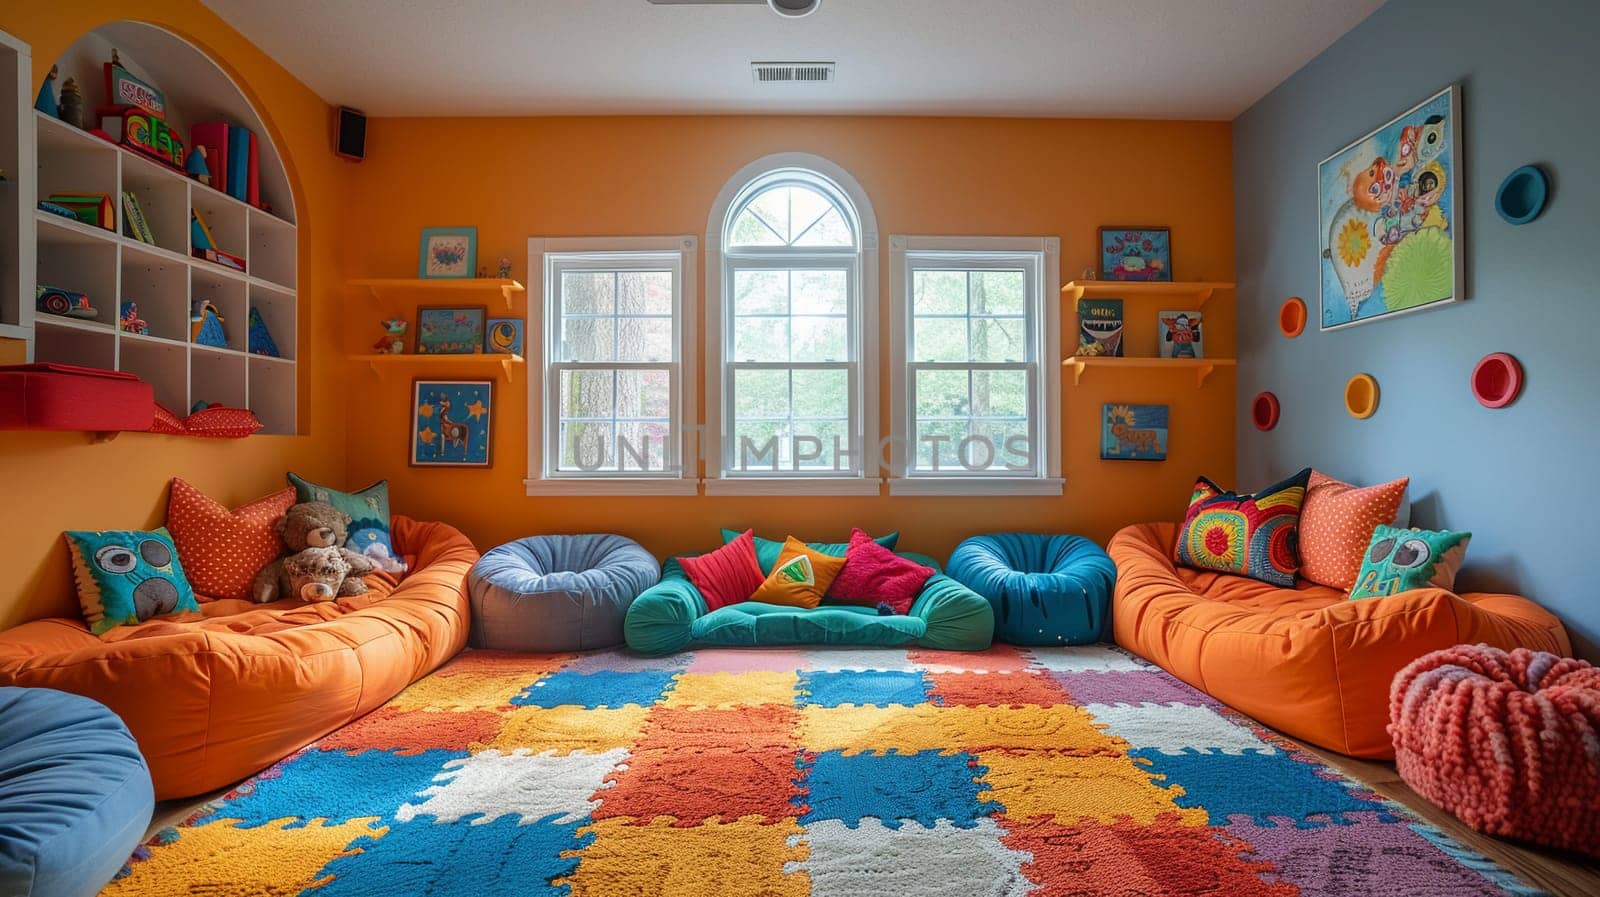 Whimsical children's playroom with bright colors and imaginative decor